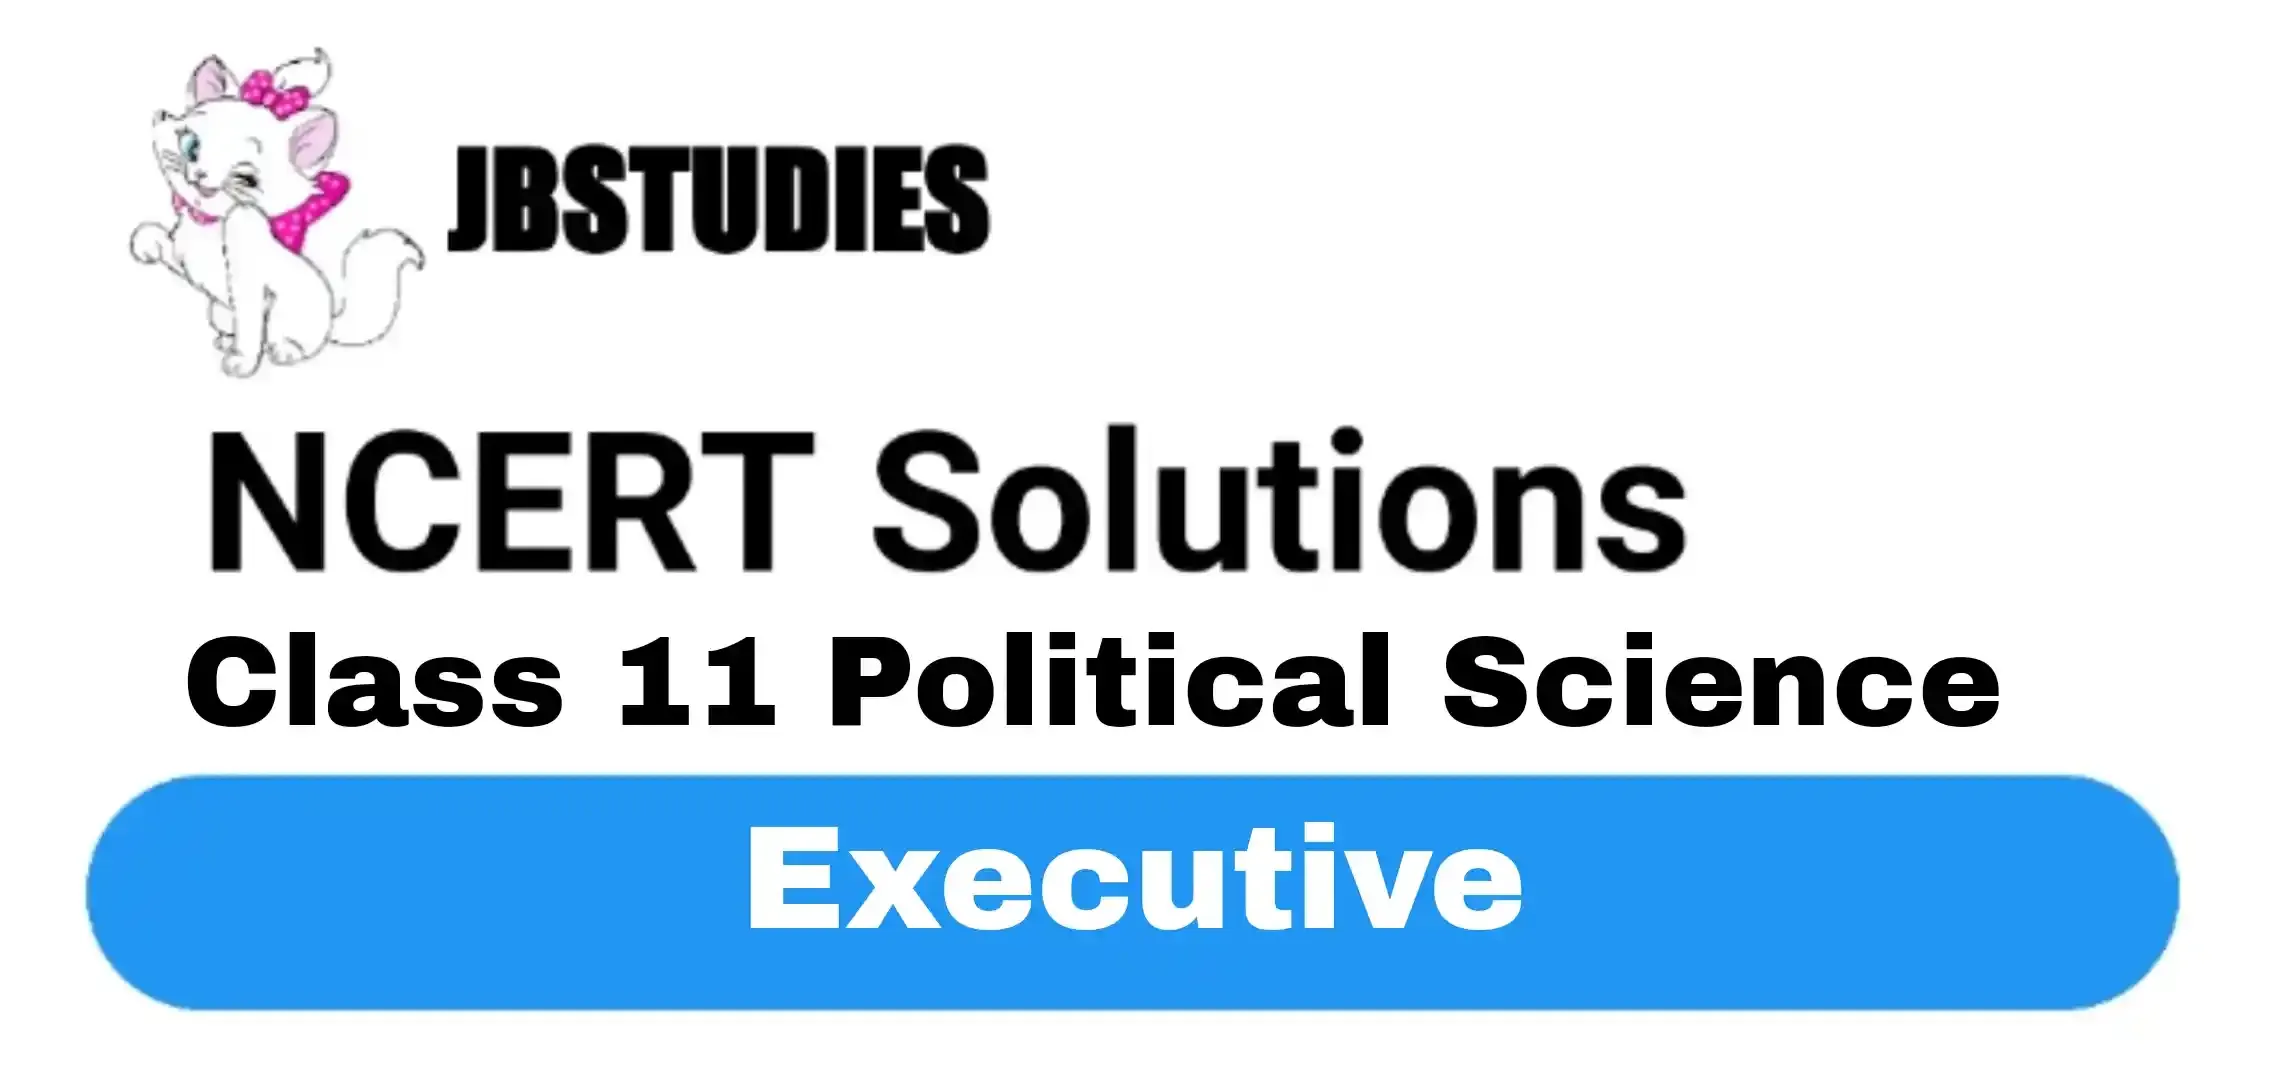 Solutions Class 11 Political Science Chapter-4 Executive